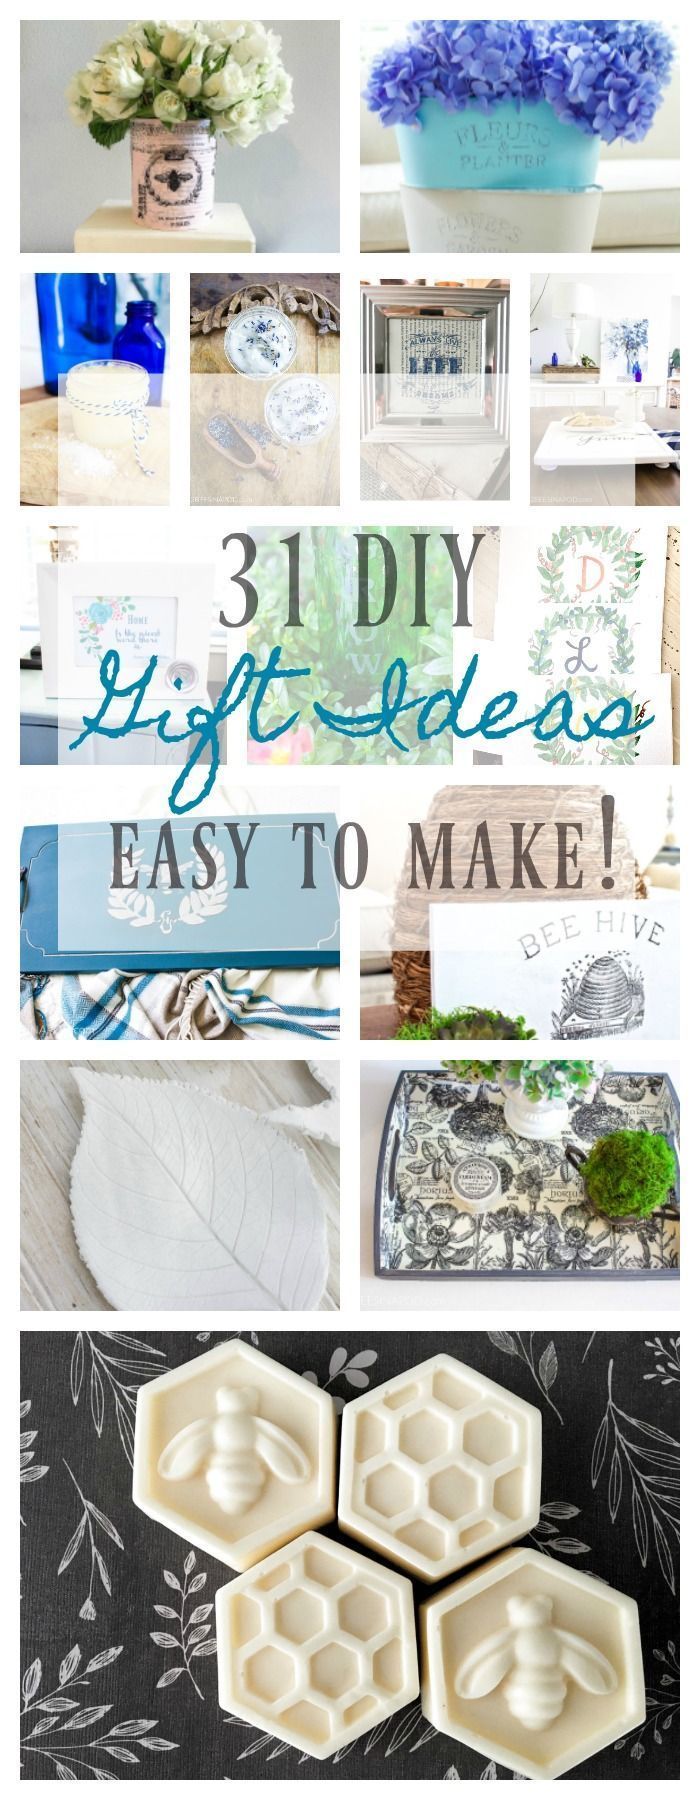 13 diy Gifts just because ideas